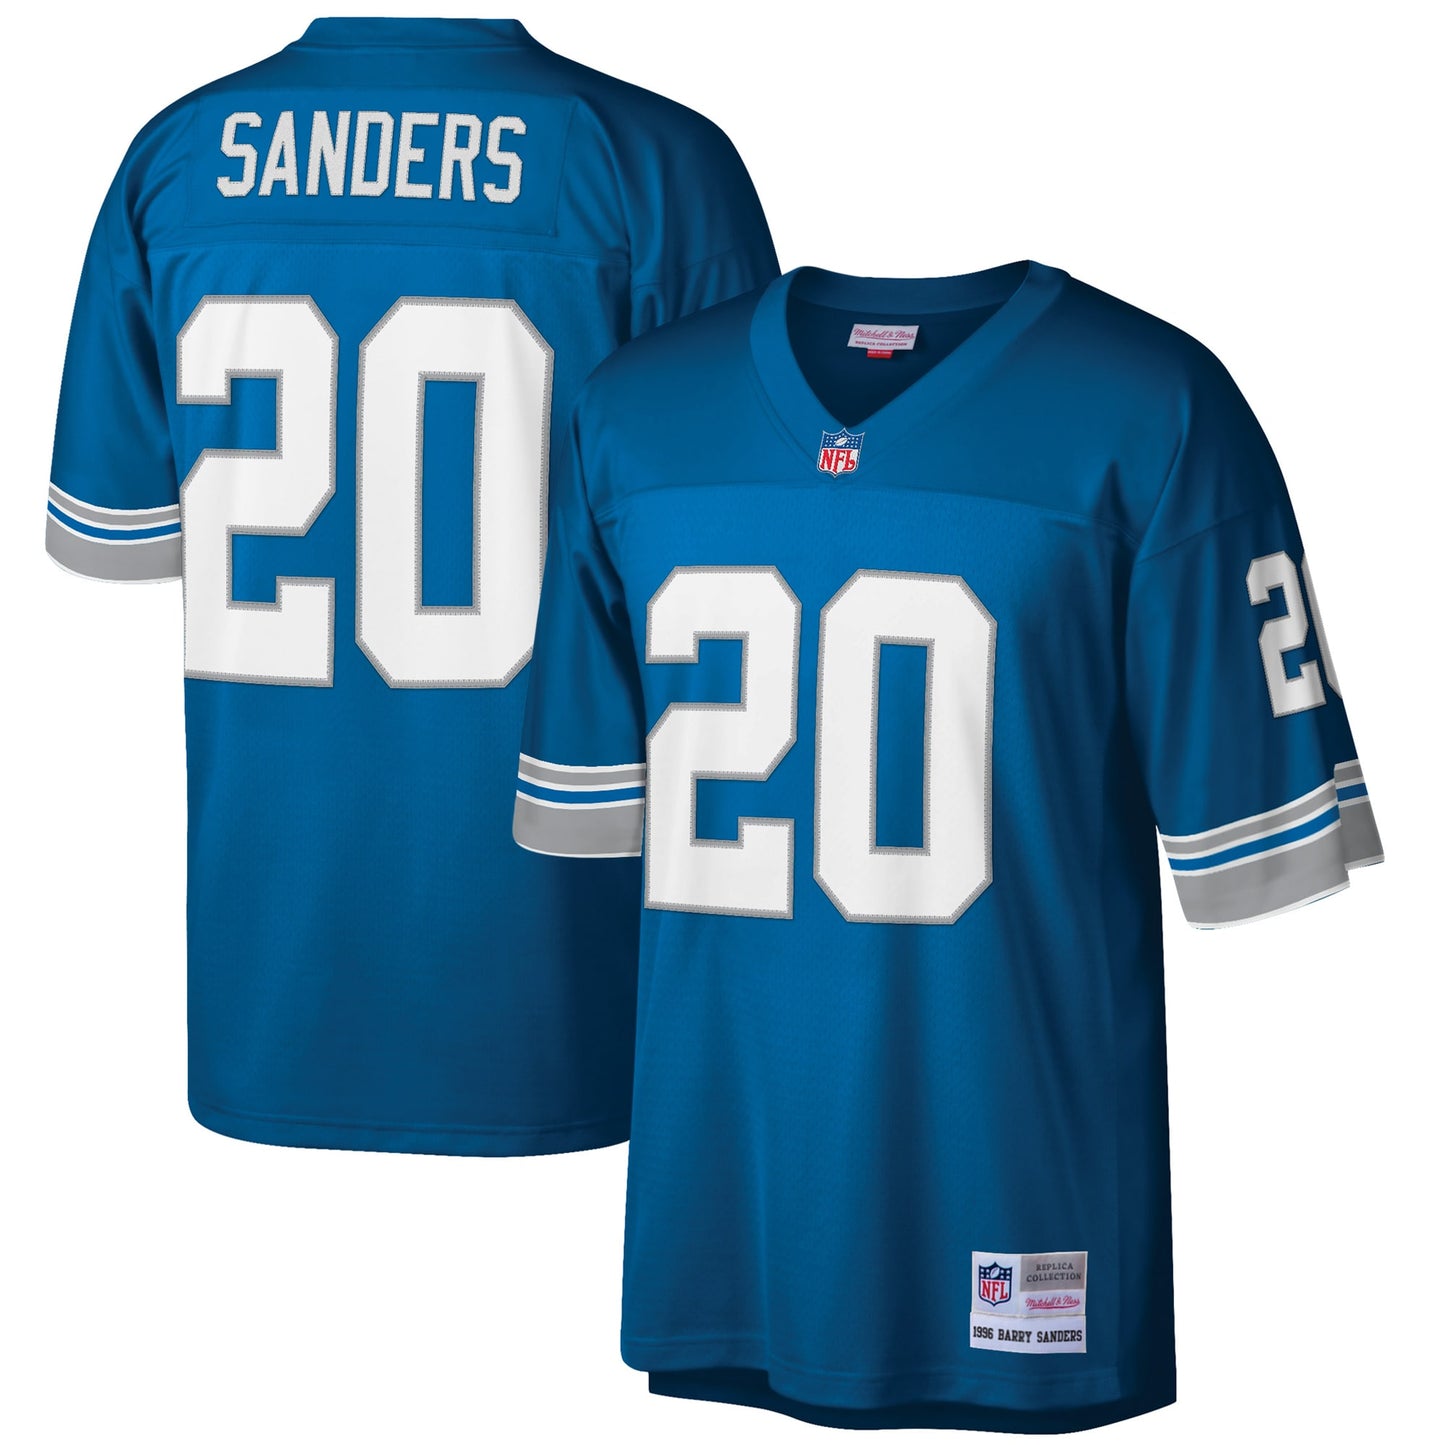 Barry Sanders Detroit Lions Mitchell & Ness Big & Tall 1996 Retired Player Replica Jersey - Blue